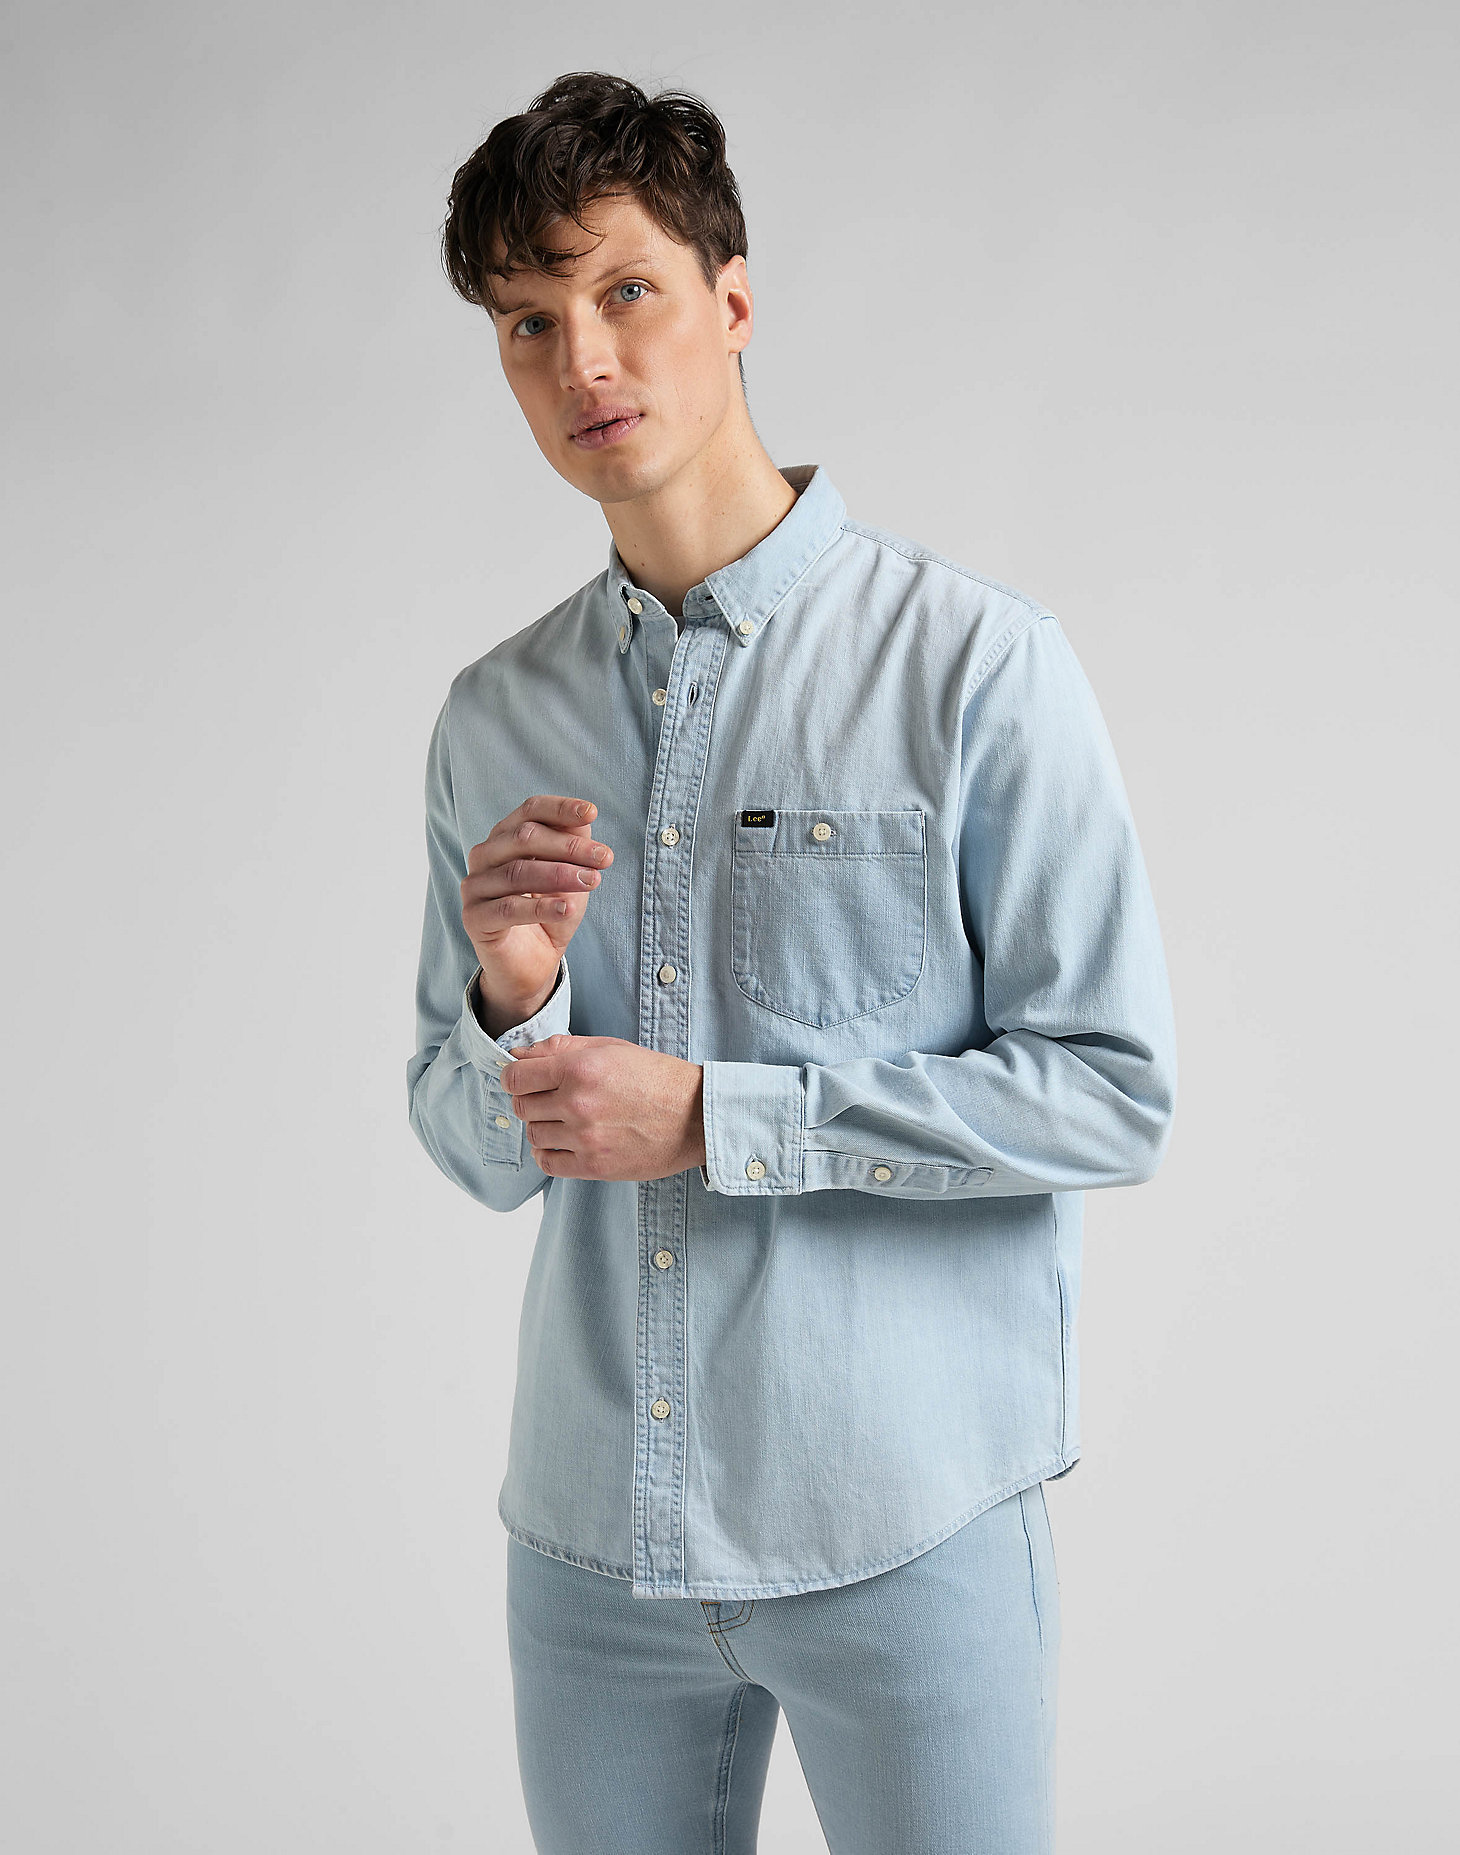 Riveted Shirt in Ice Blue main view